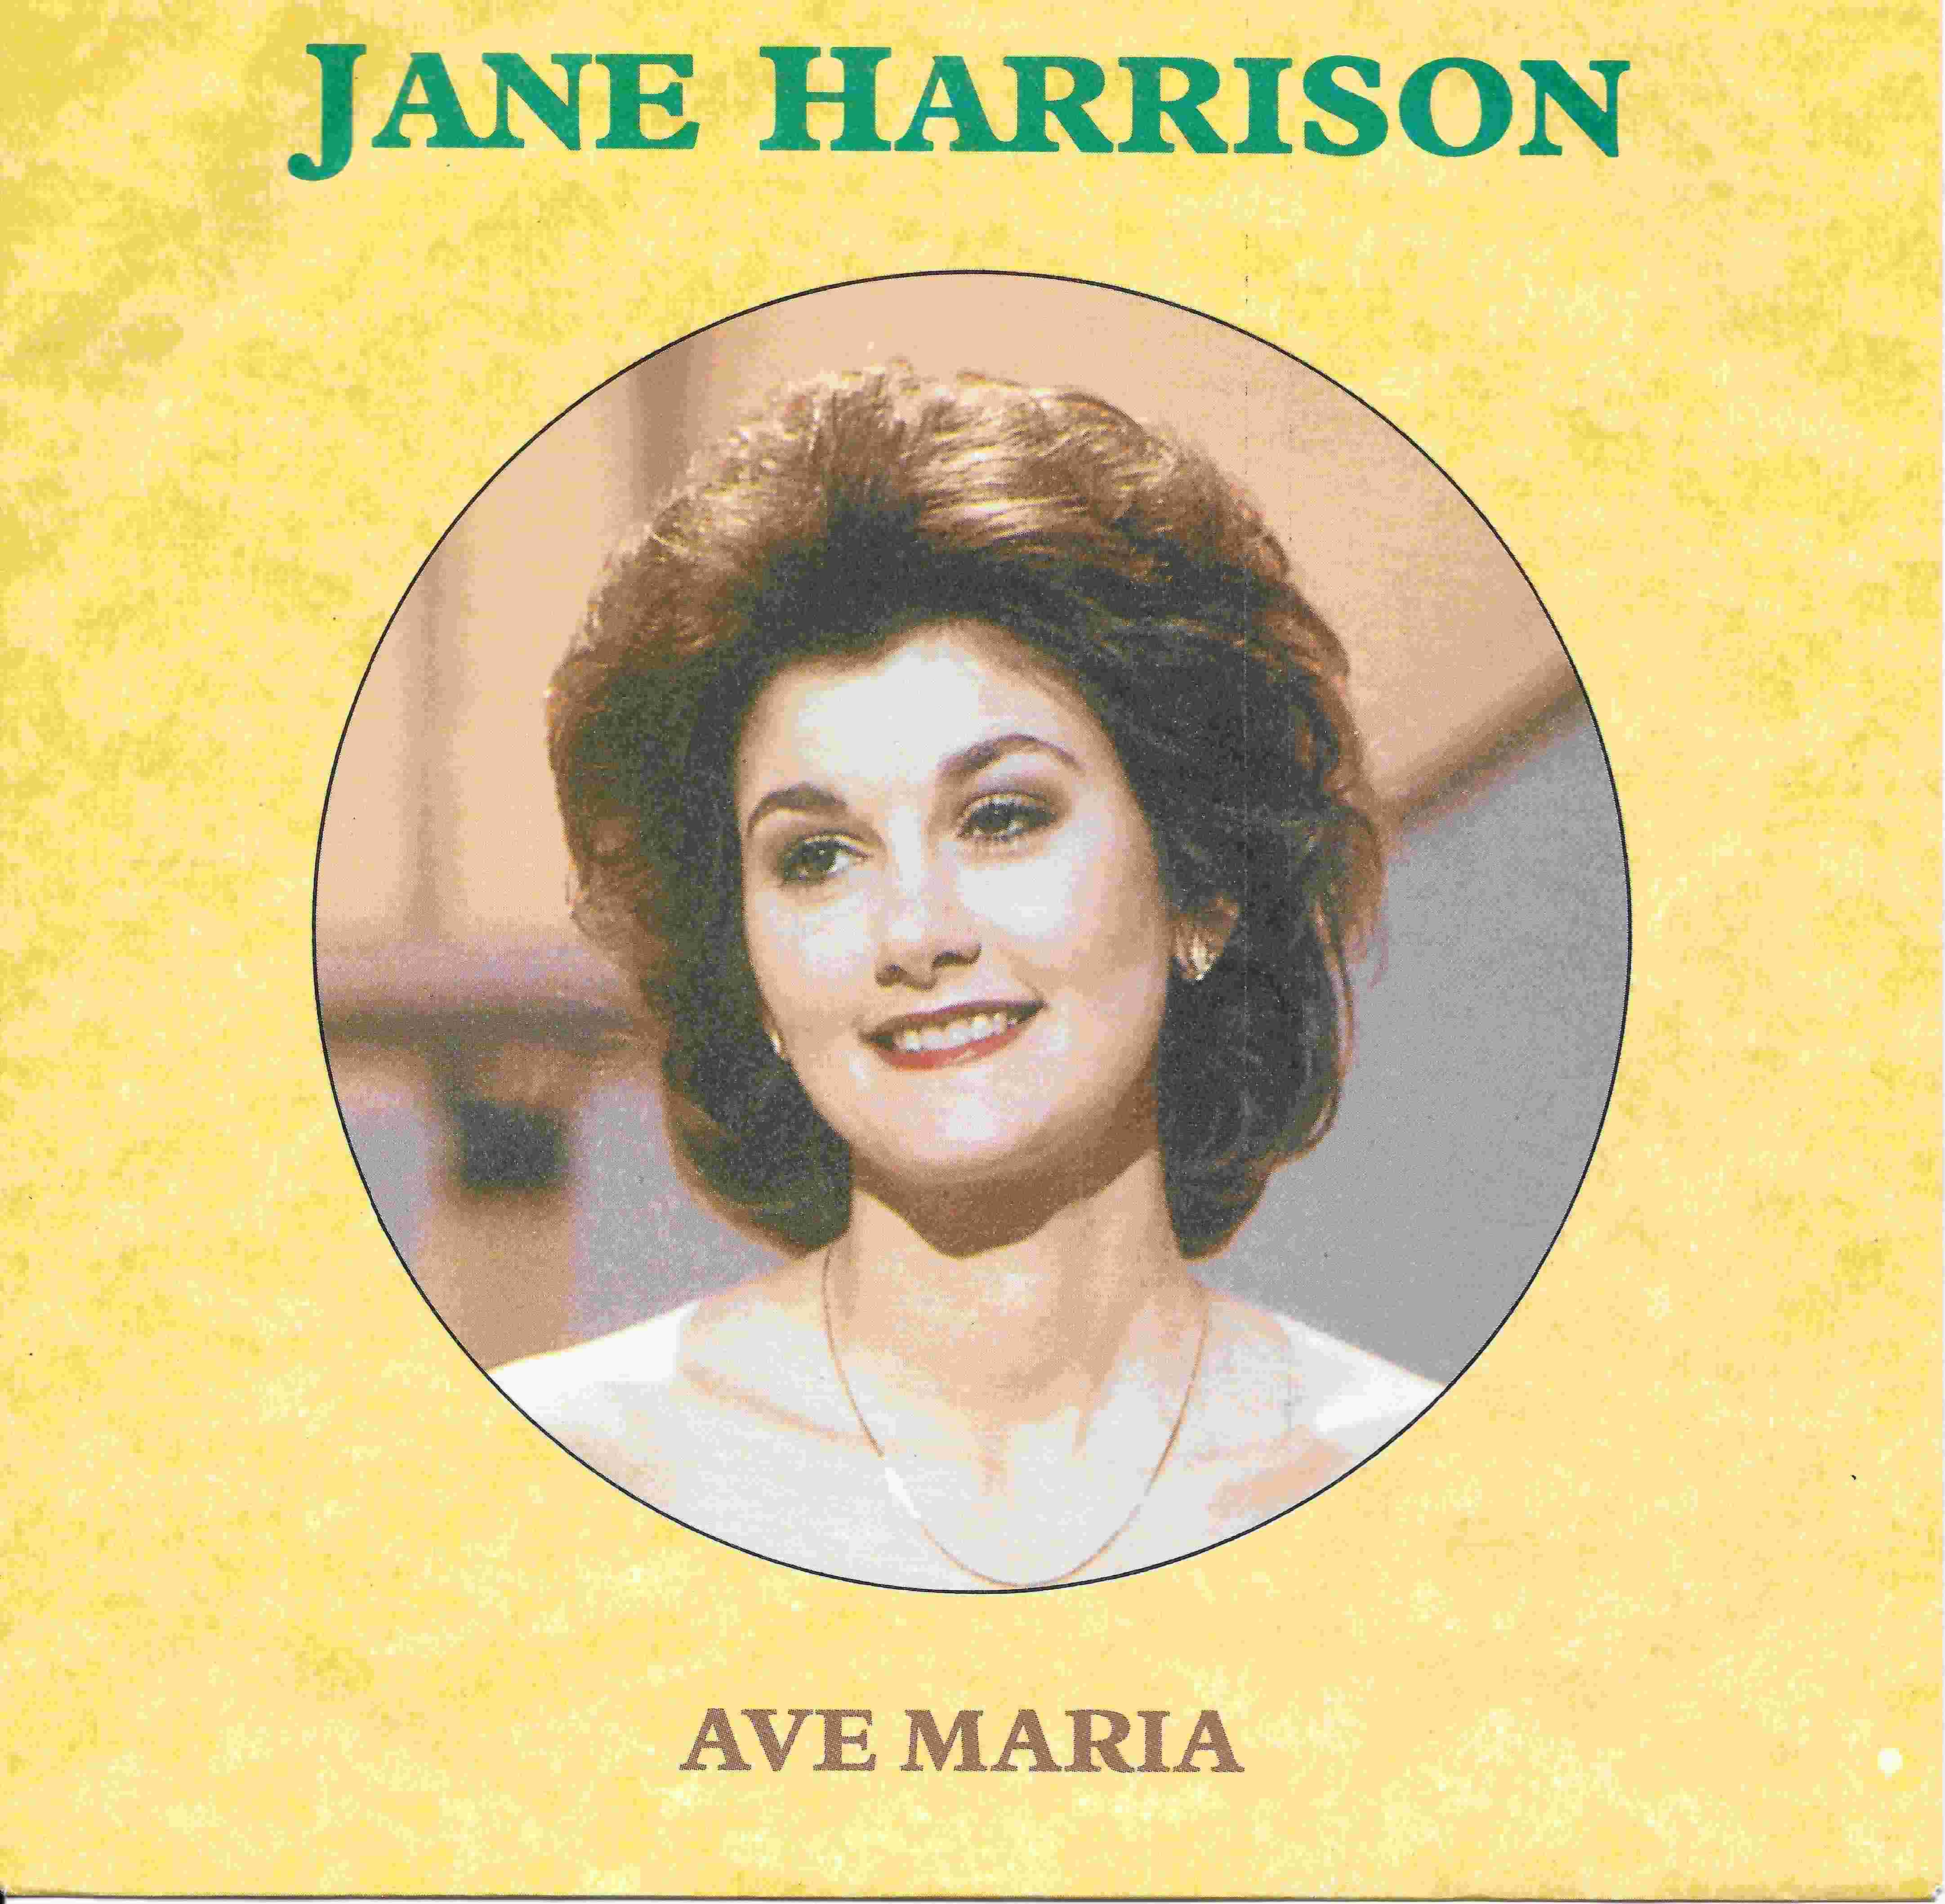 Picture of RESL 227 Ave Maria by artist Jane Harrison from the BBC records and Tapes library